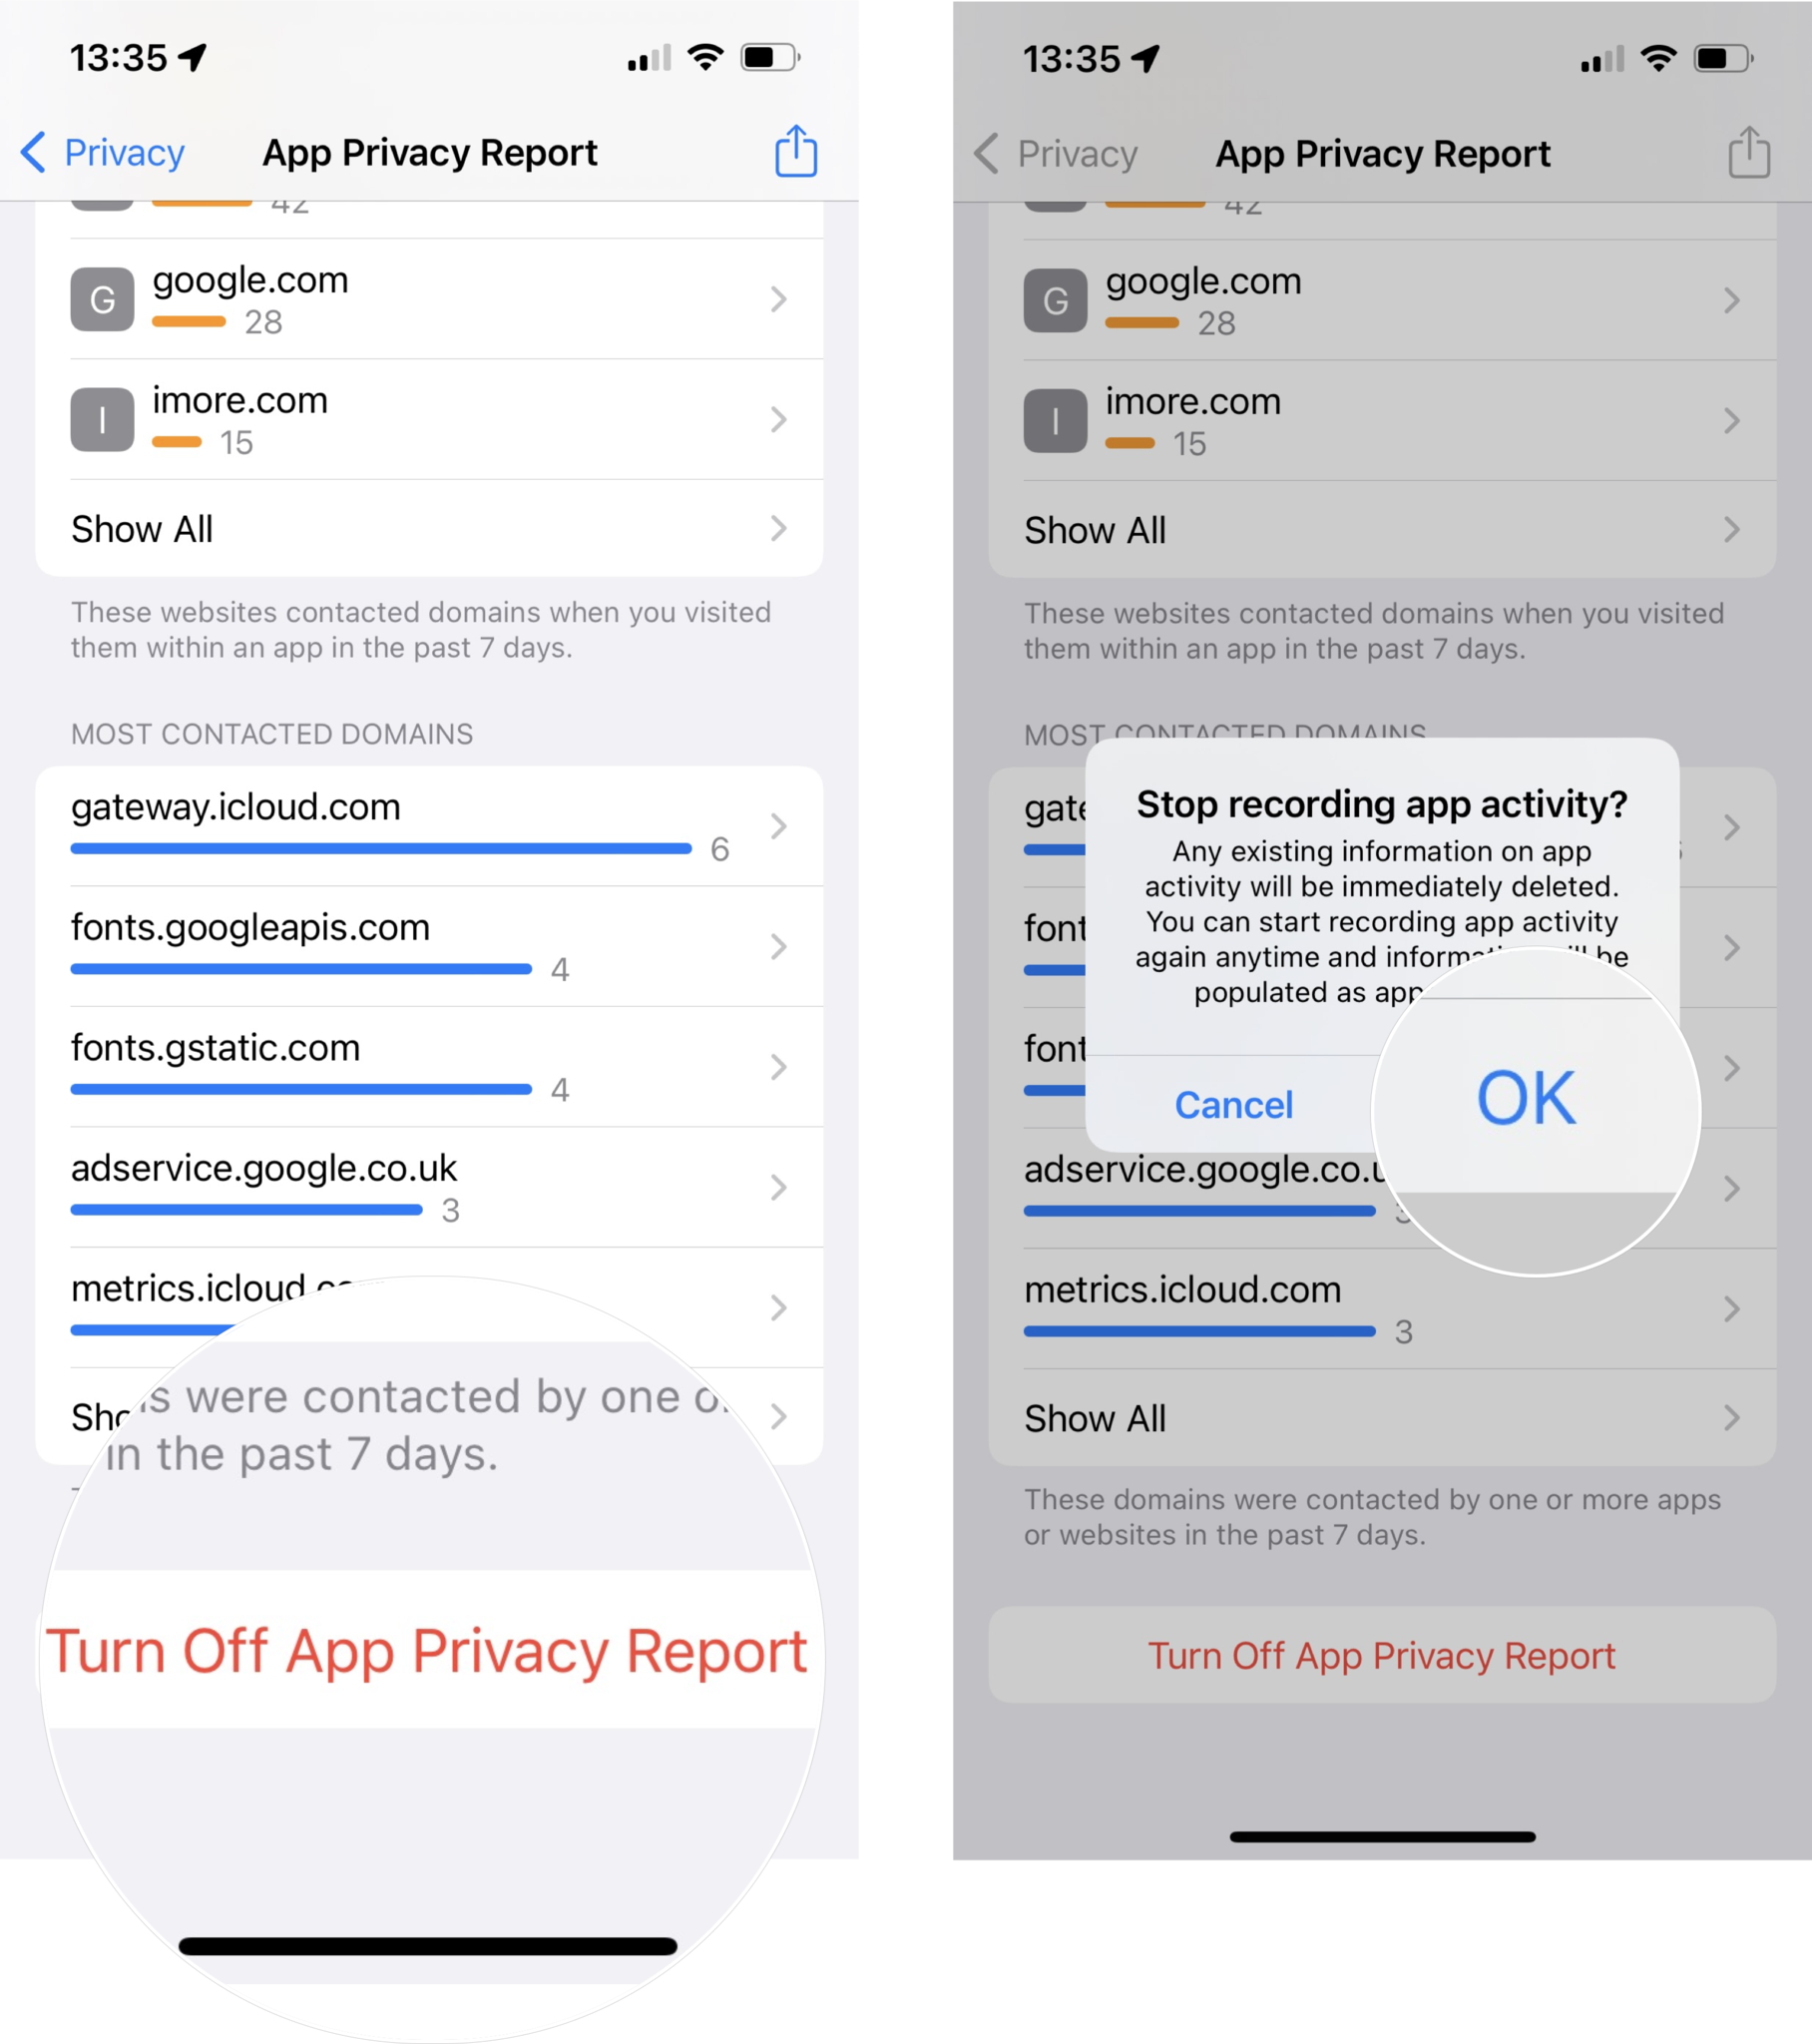 How to turn off App Privacy Report: Tap Turn Off App Privacy Report, tap OK